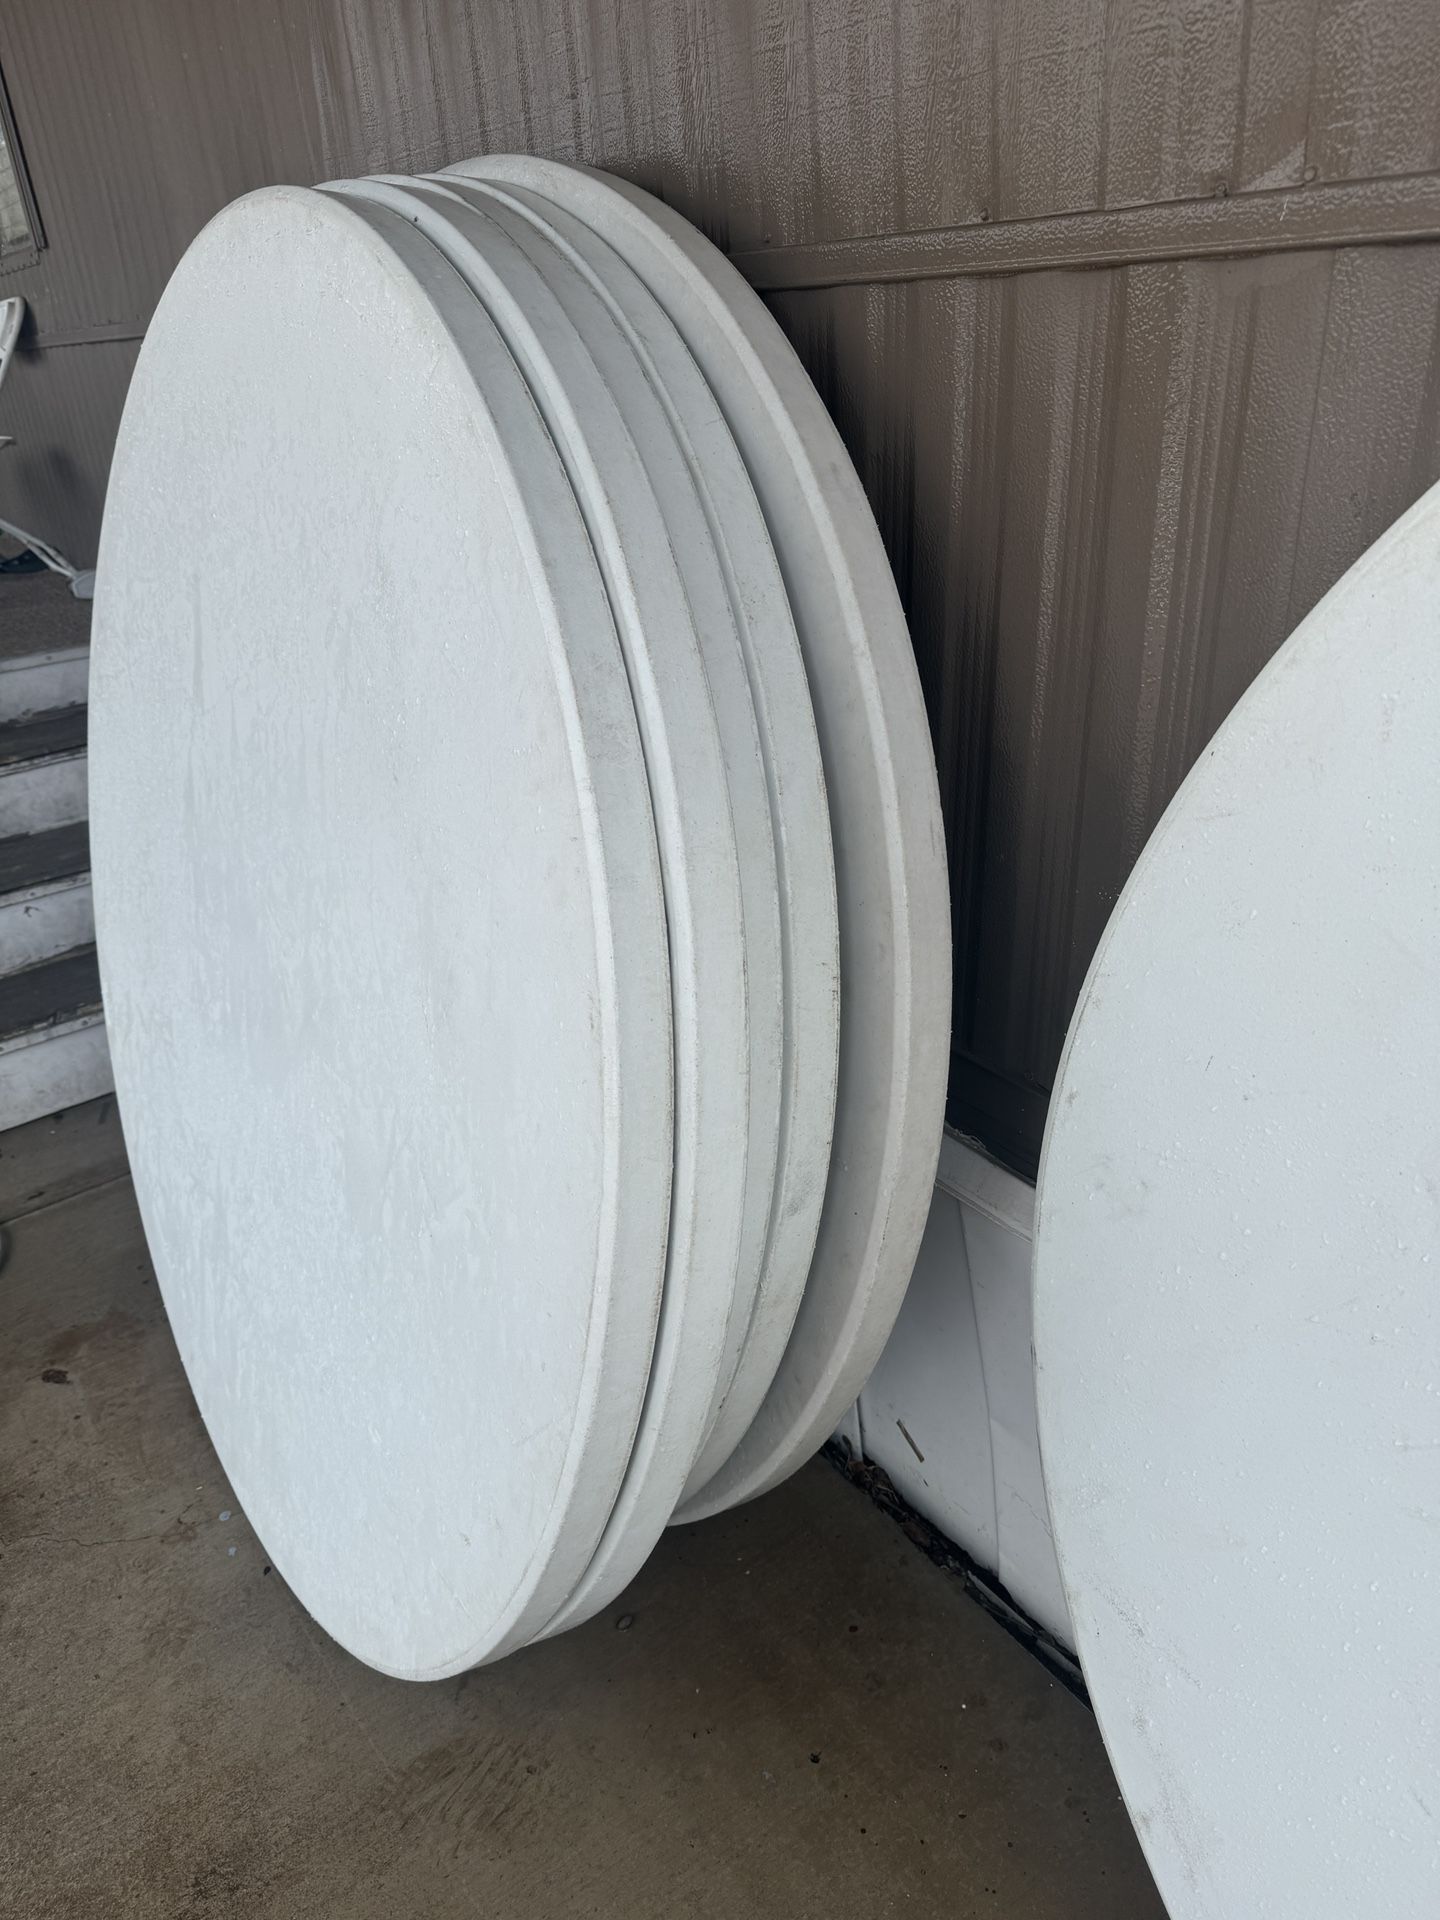 60 Inch Round Plastic Tables $85 Each